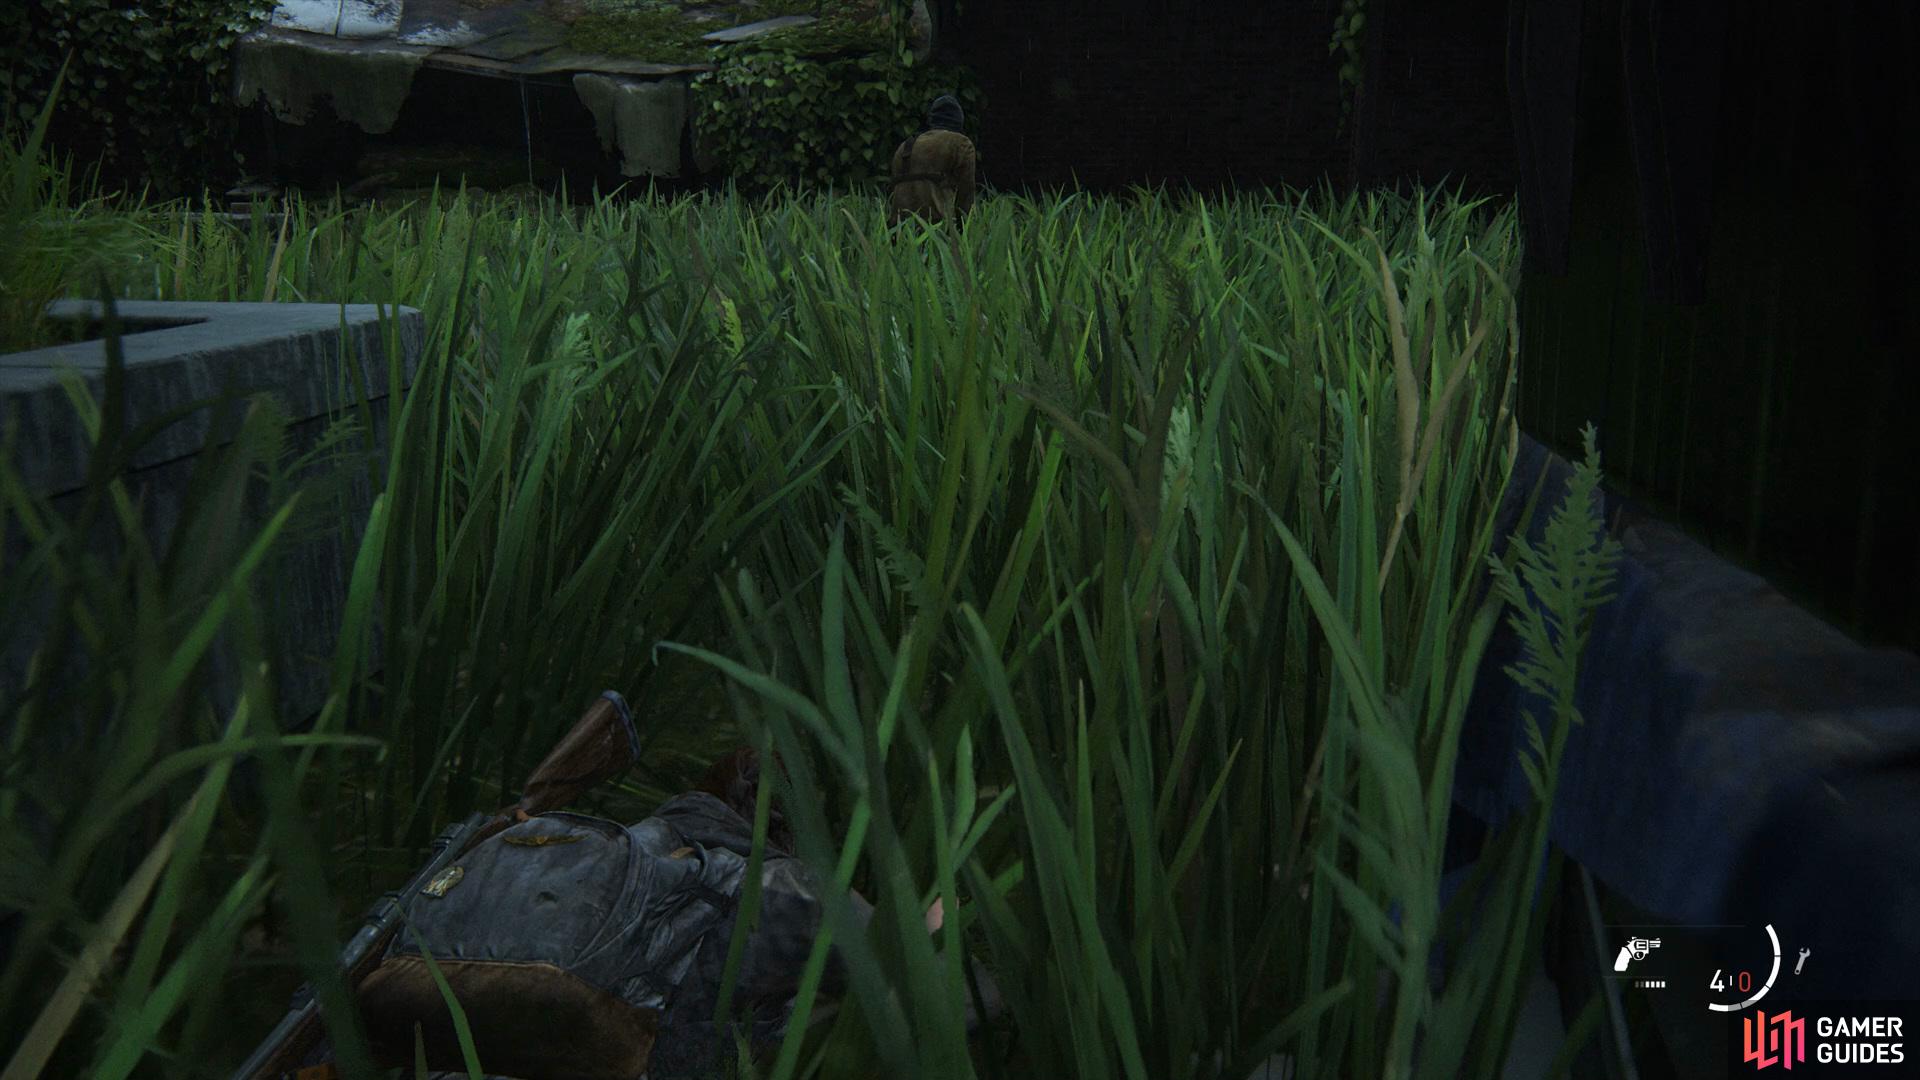 then when you reach the open room use the grass to sneak up on the enemies. 